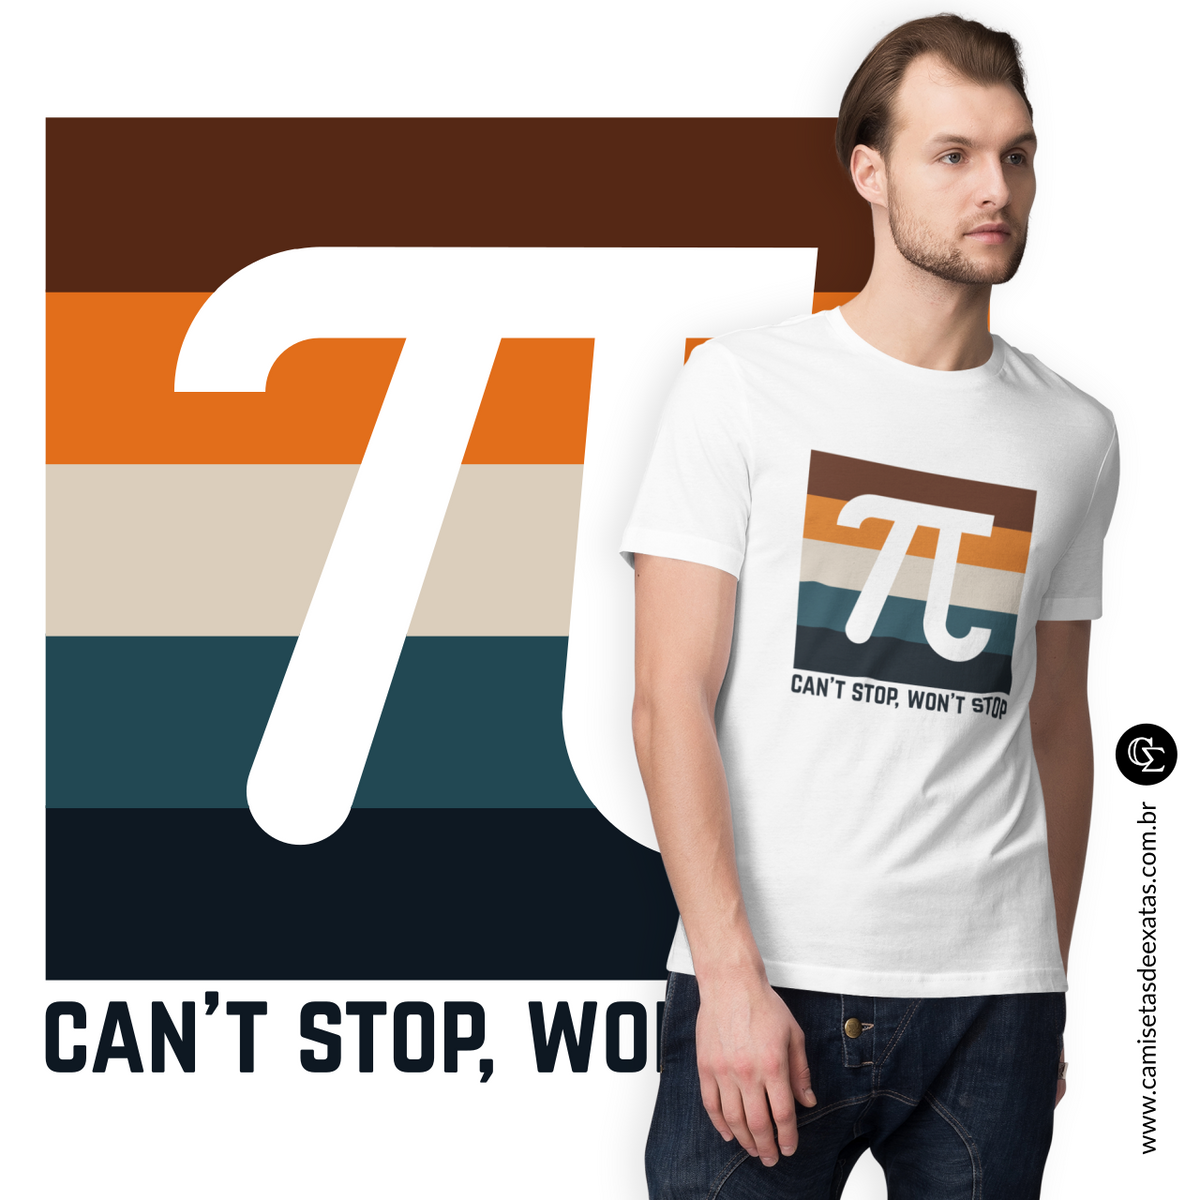 Nome do produto: CAN\'T STOP, WON\'T STOP [1]